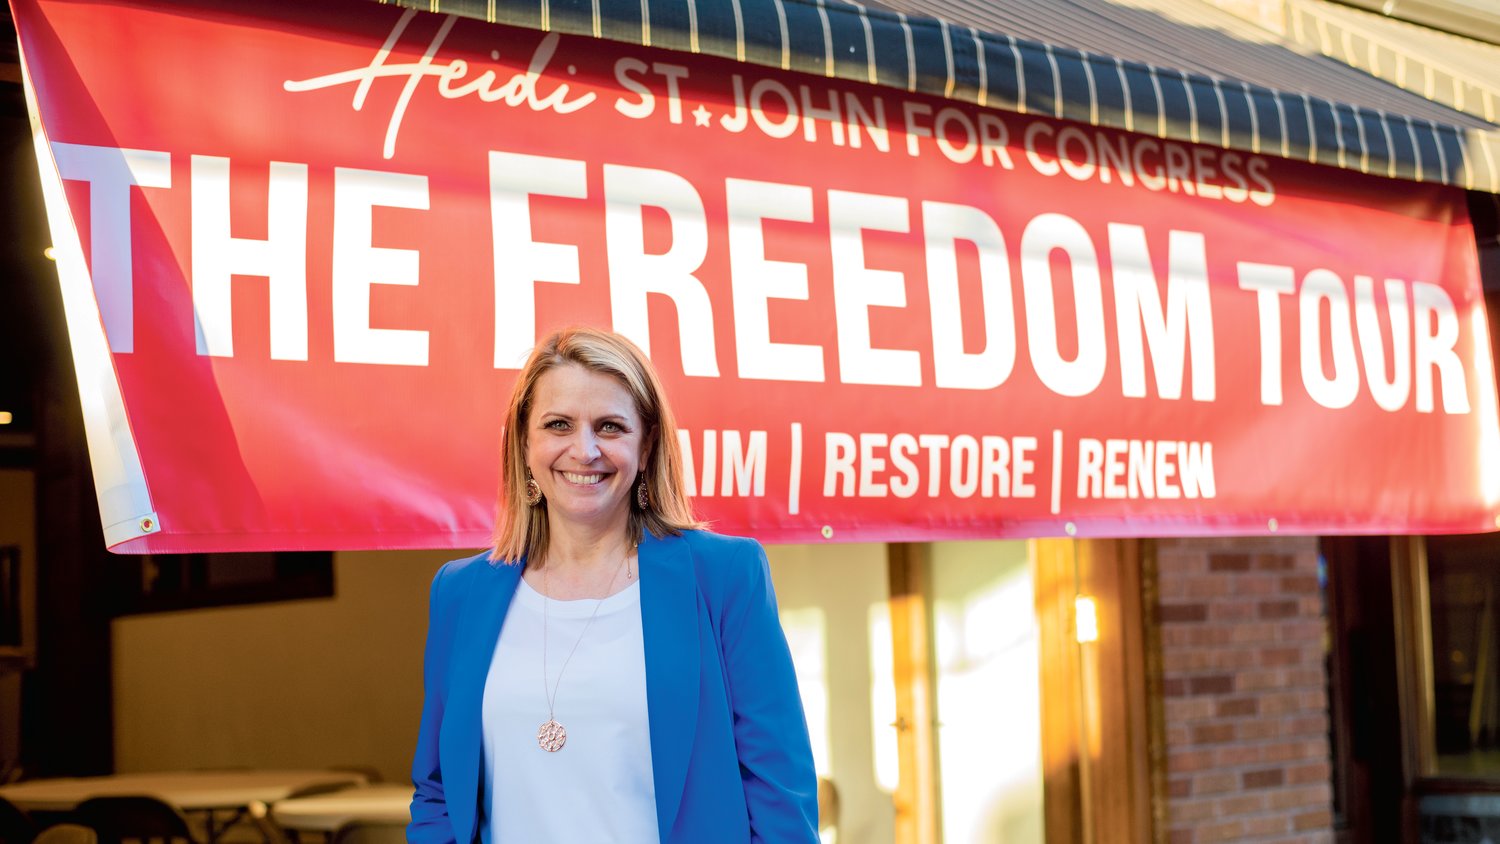 Heidi St. John smiles for a photo in front of “The Freedom Tour” banner Tuesday afternoon in downtown Centralia.